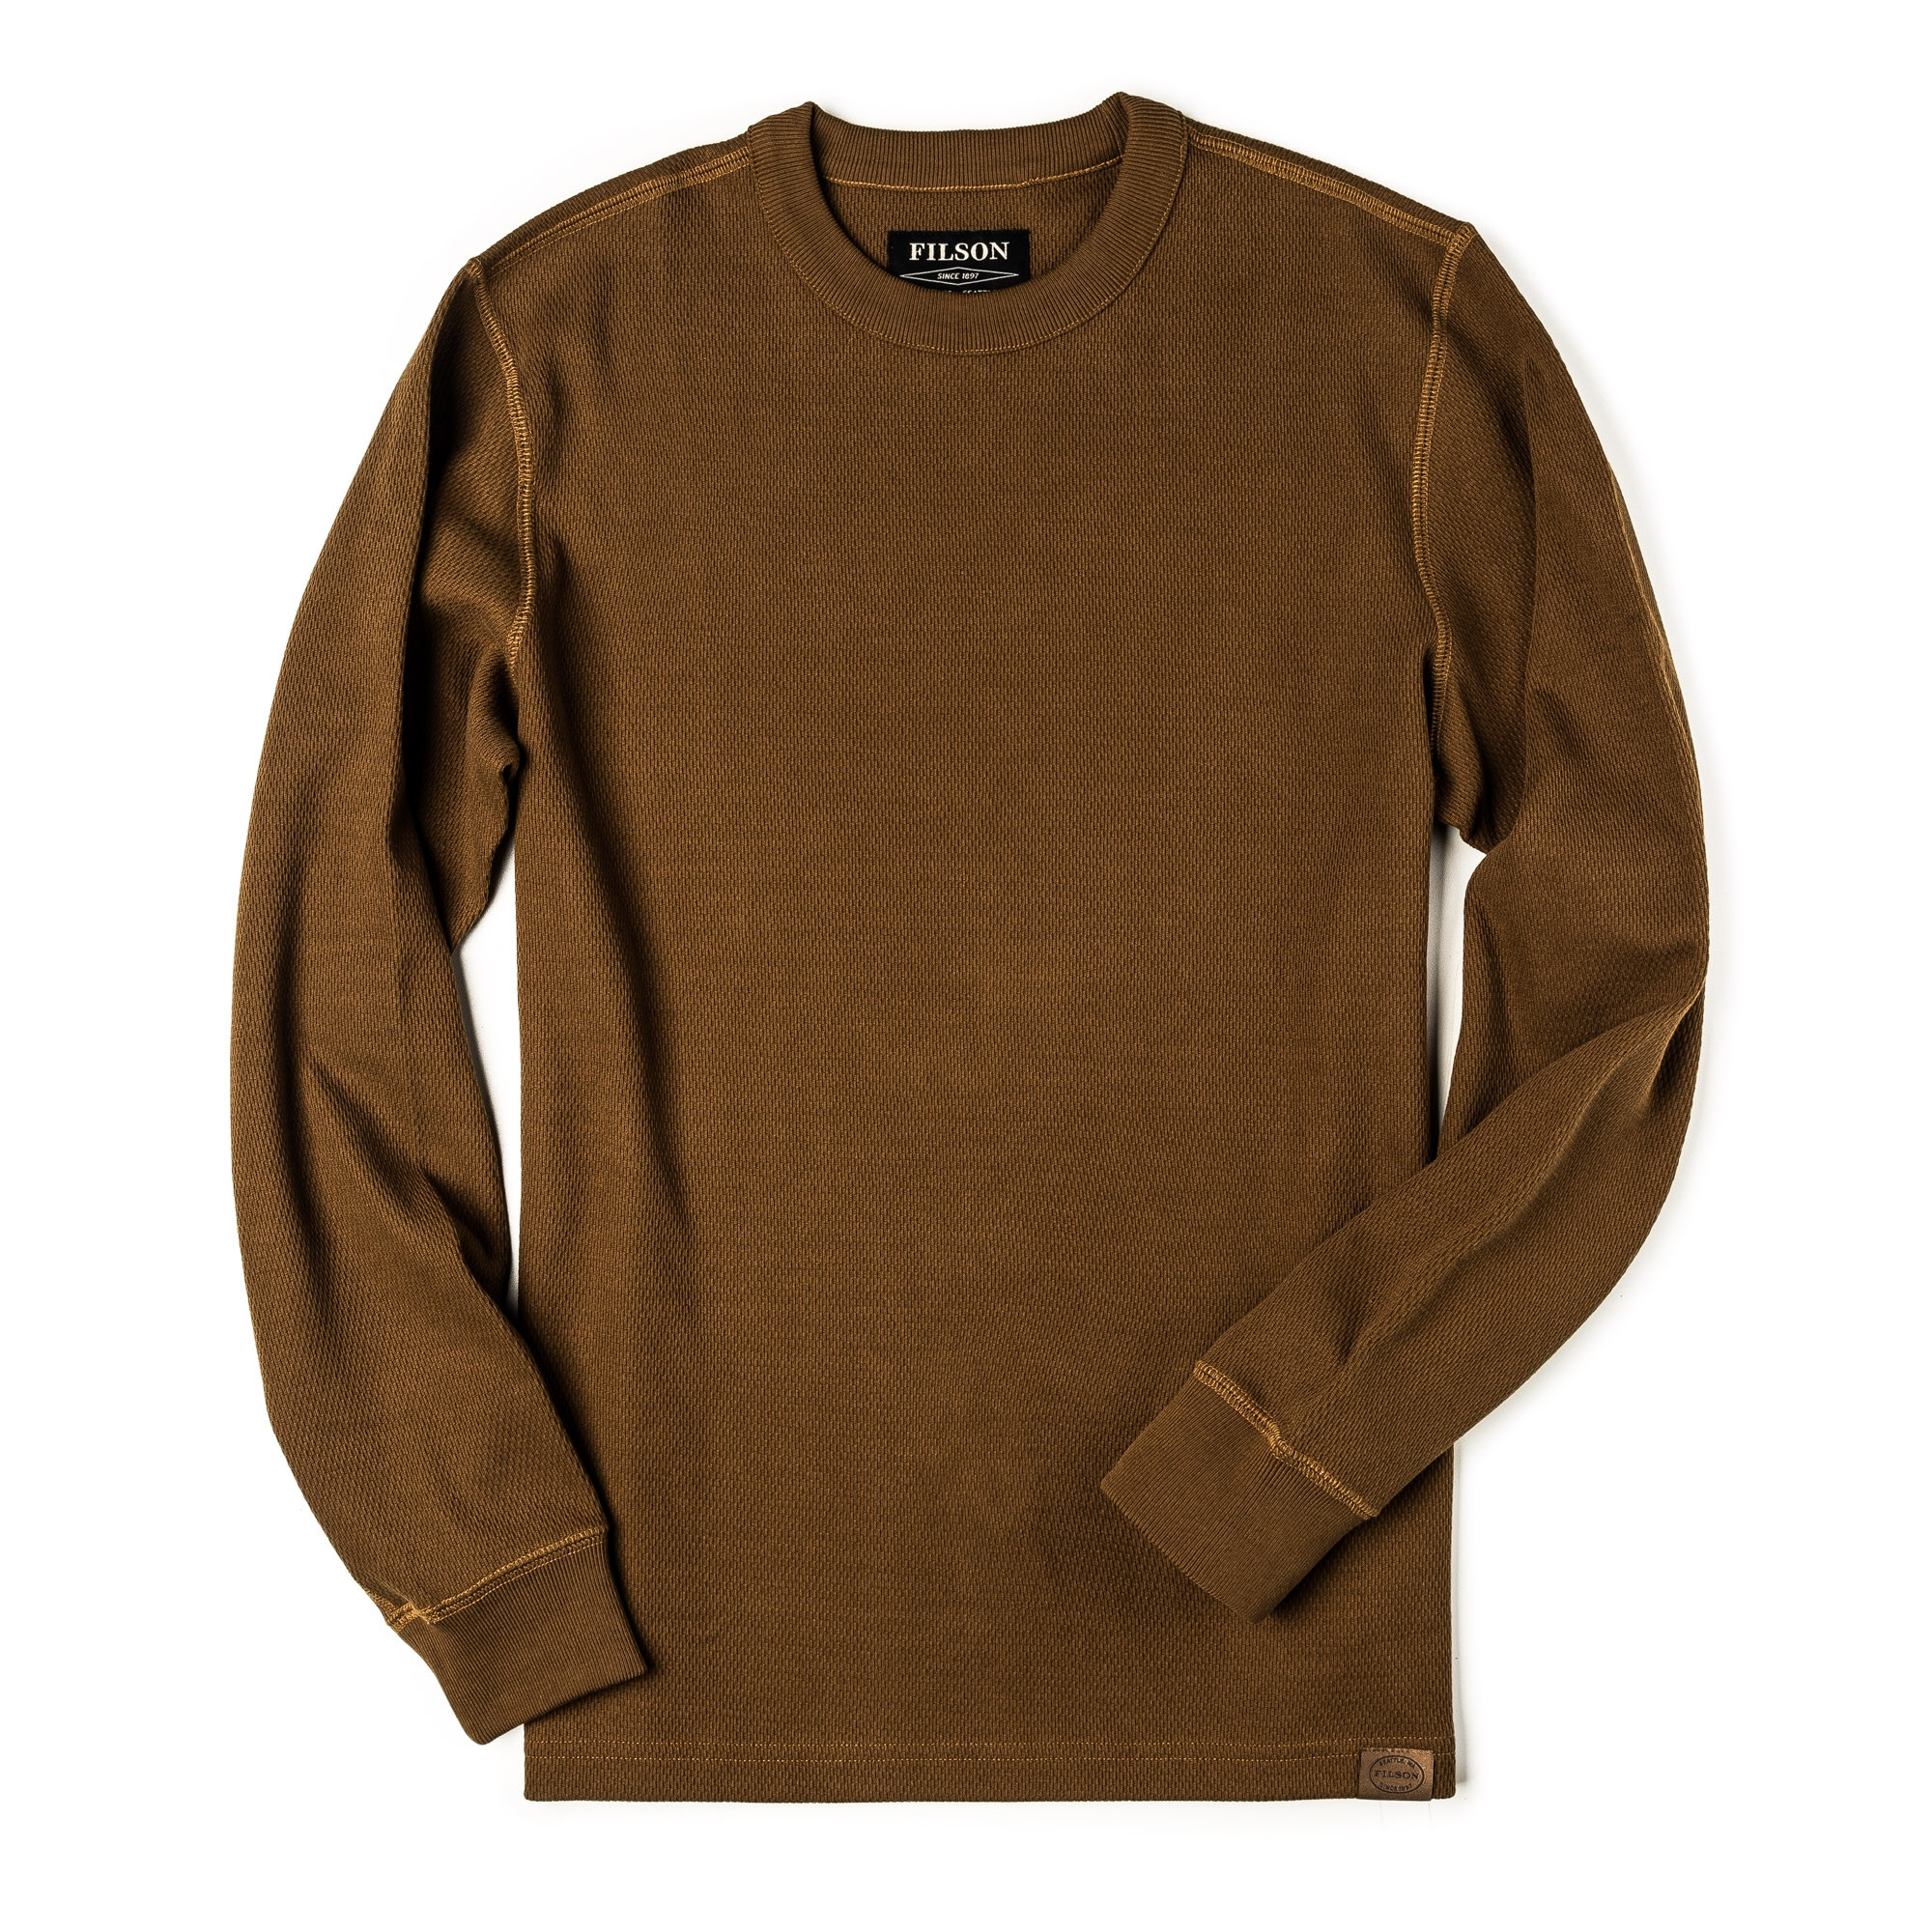 Filson - Waffle Knit Thermal Crew Neck